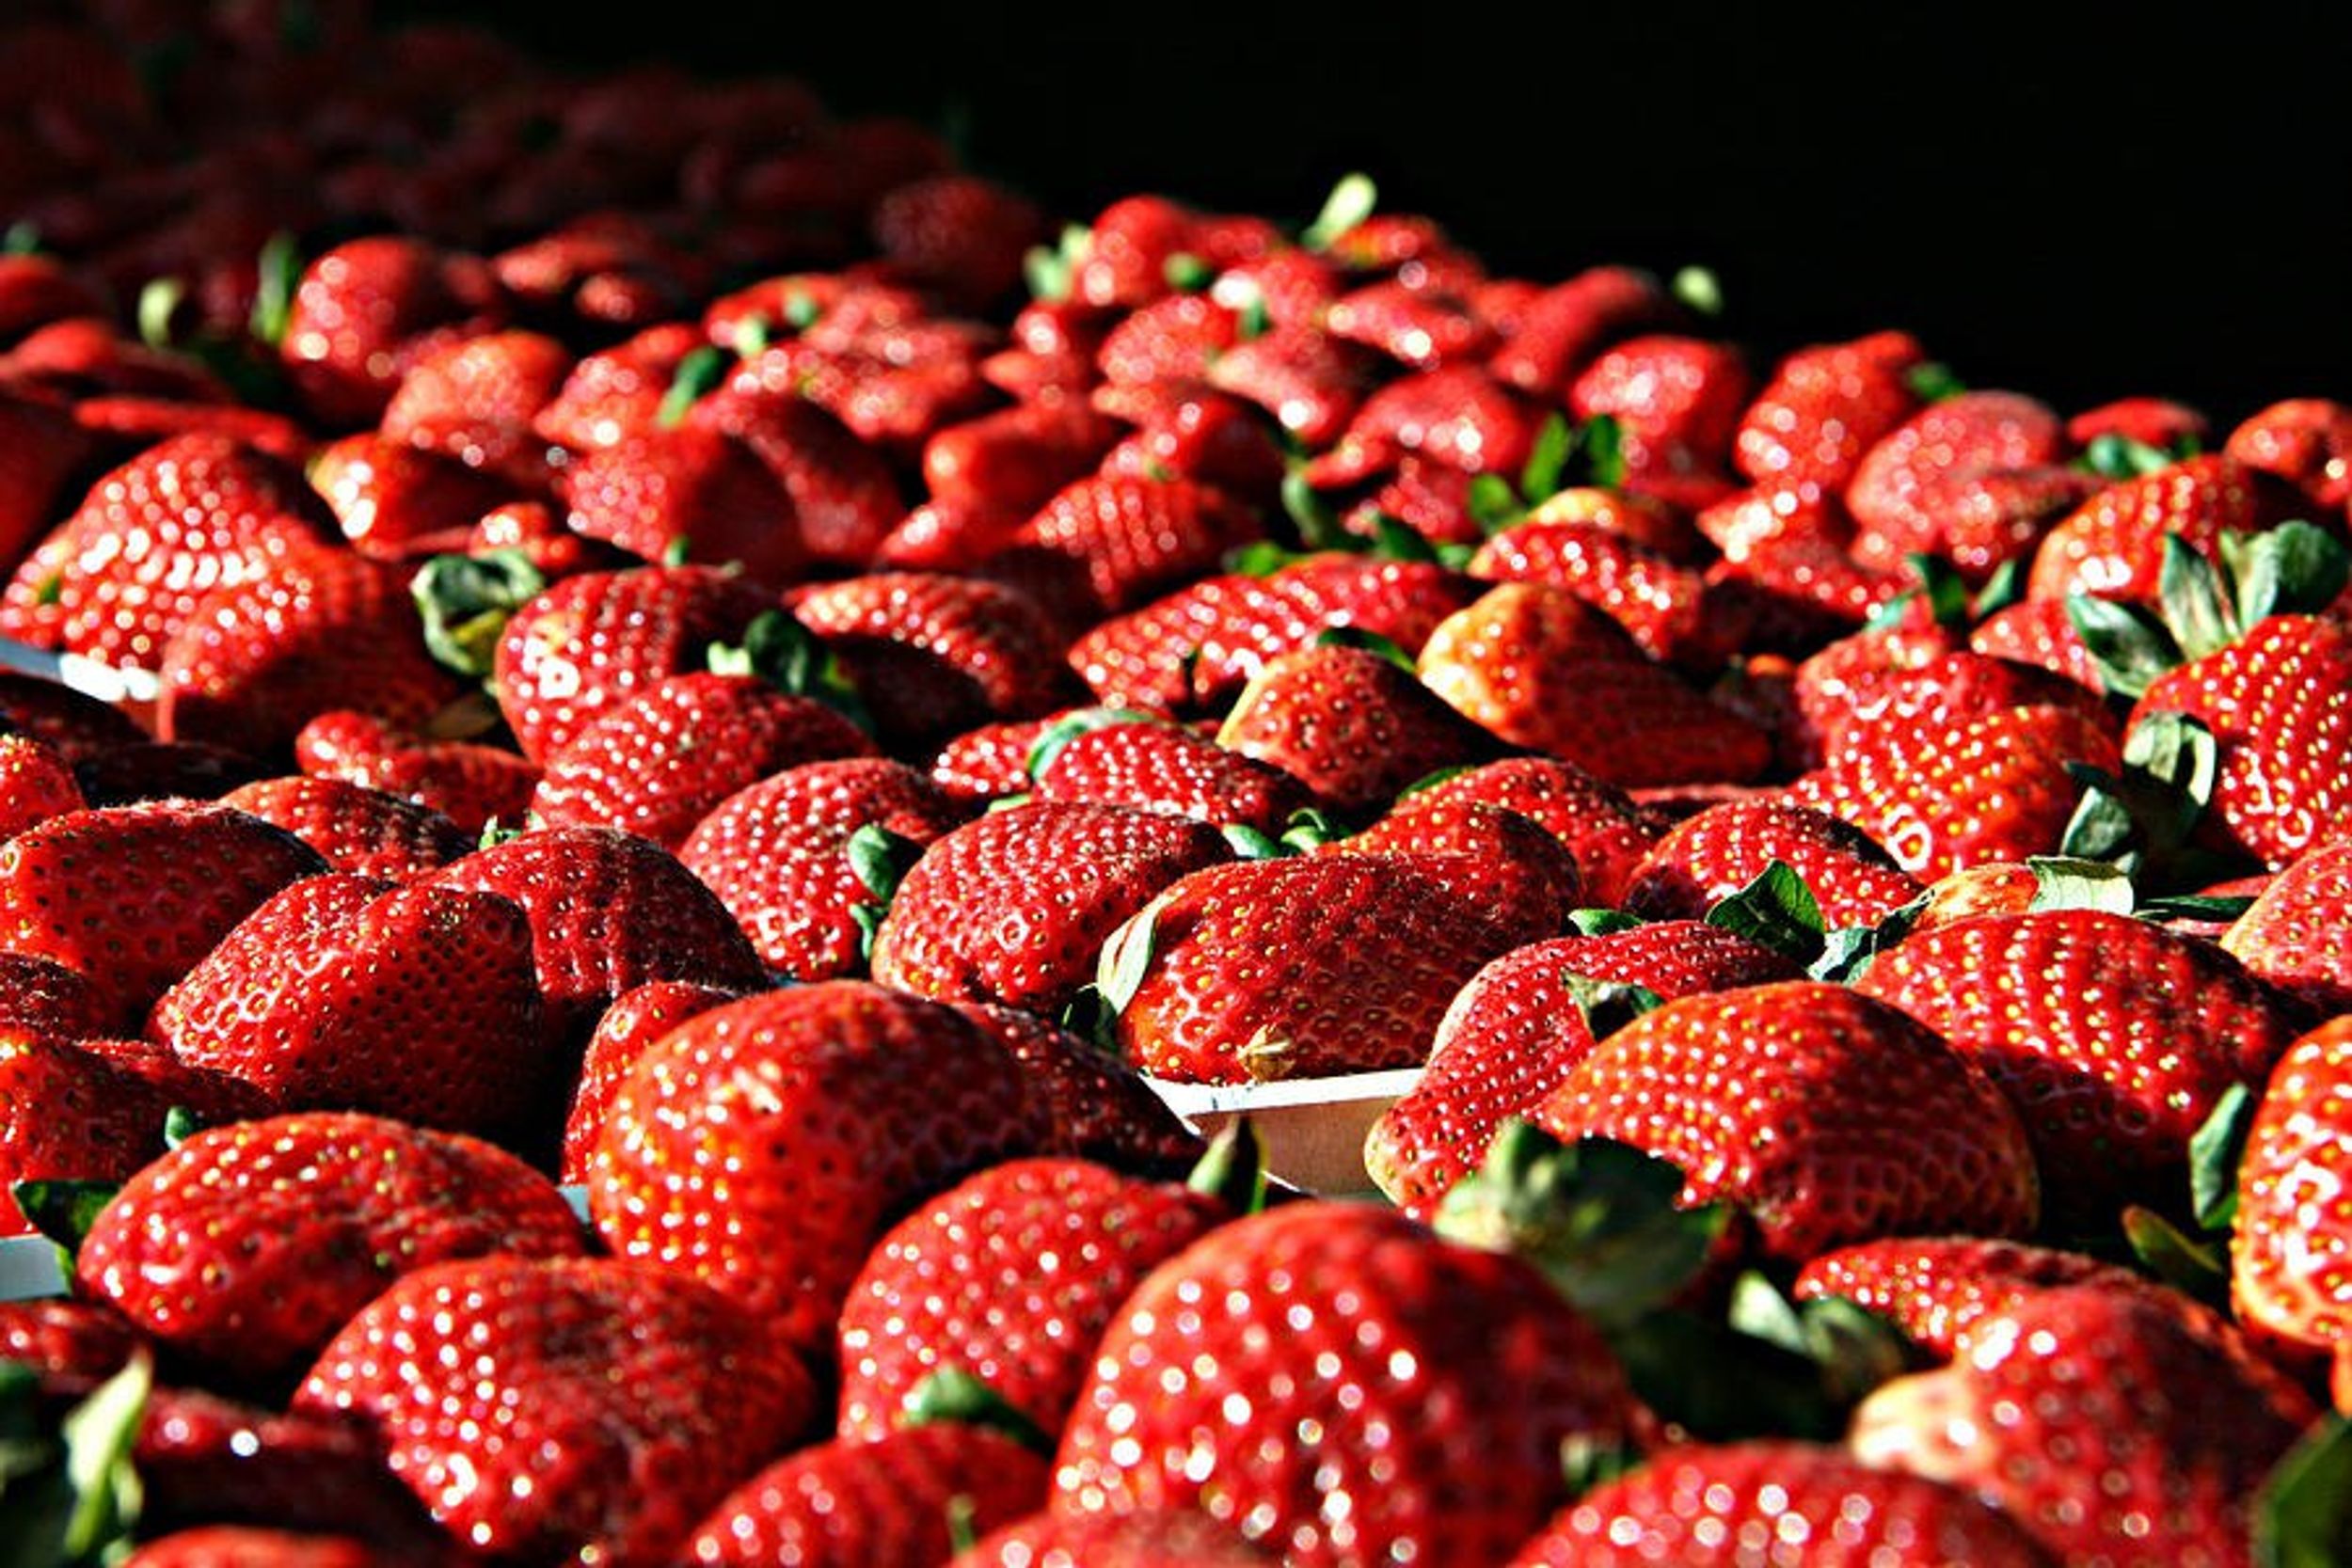 The REAL Science Behind Strawberries